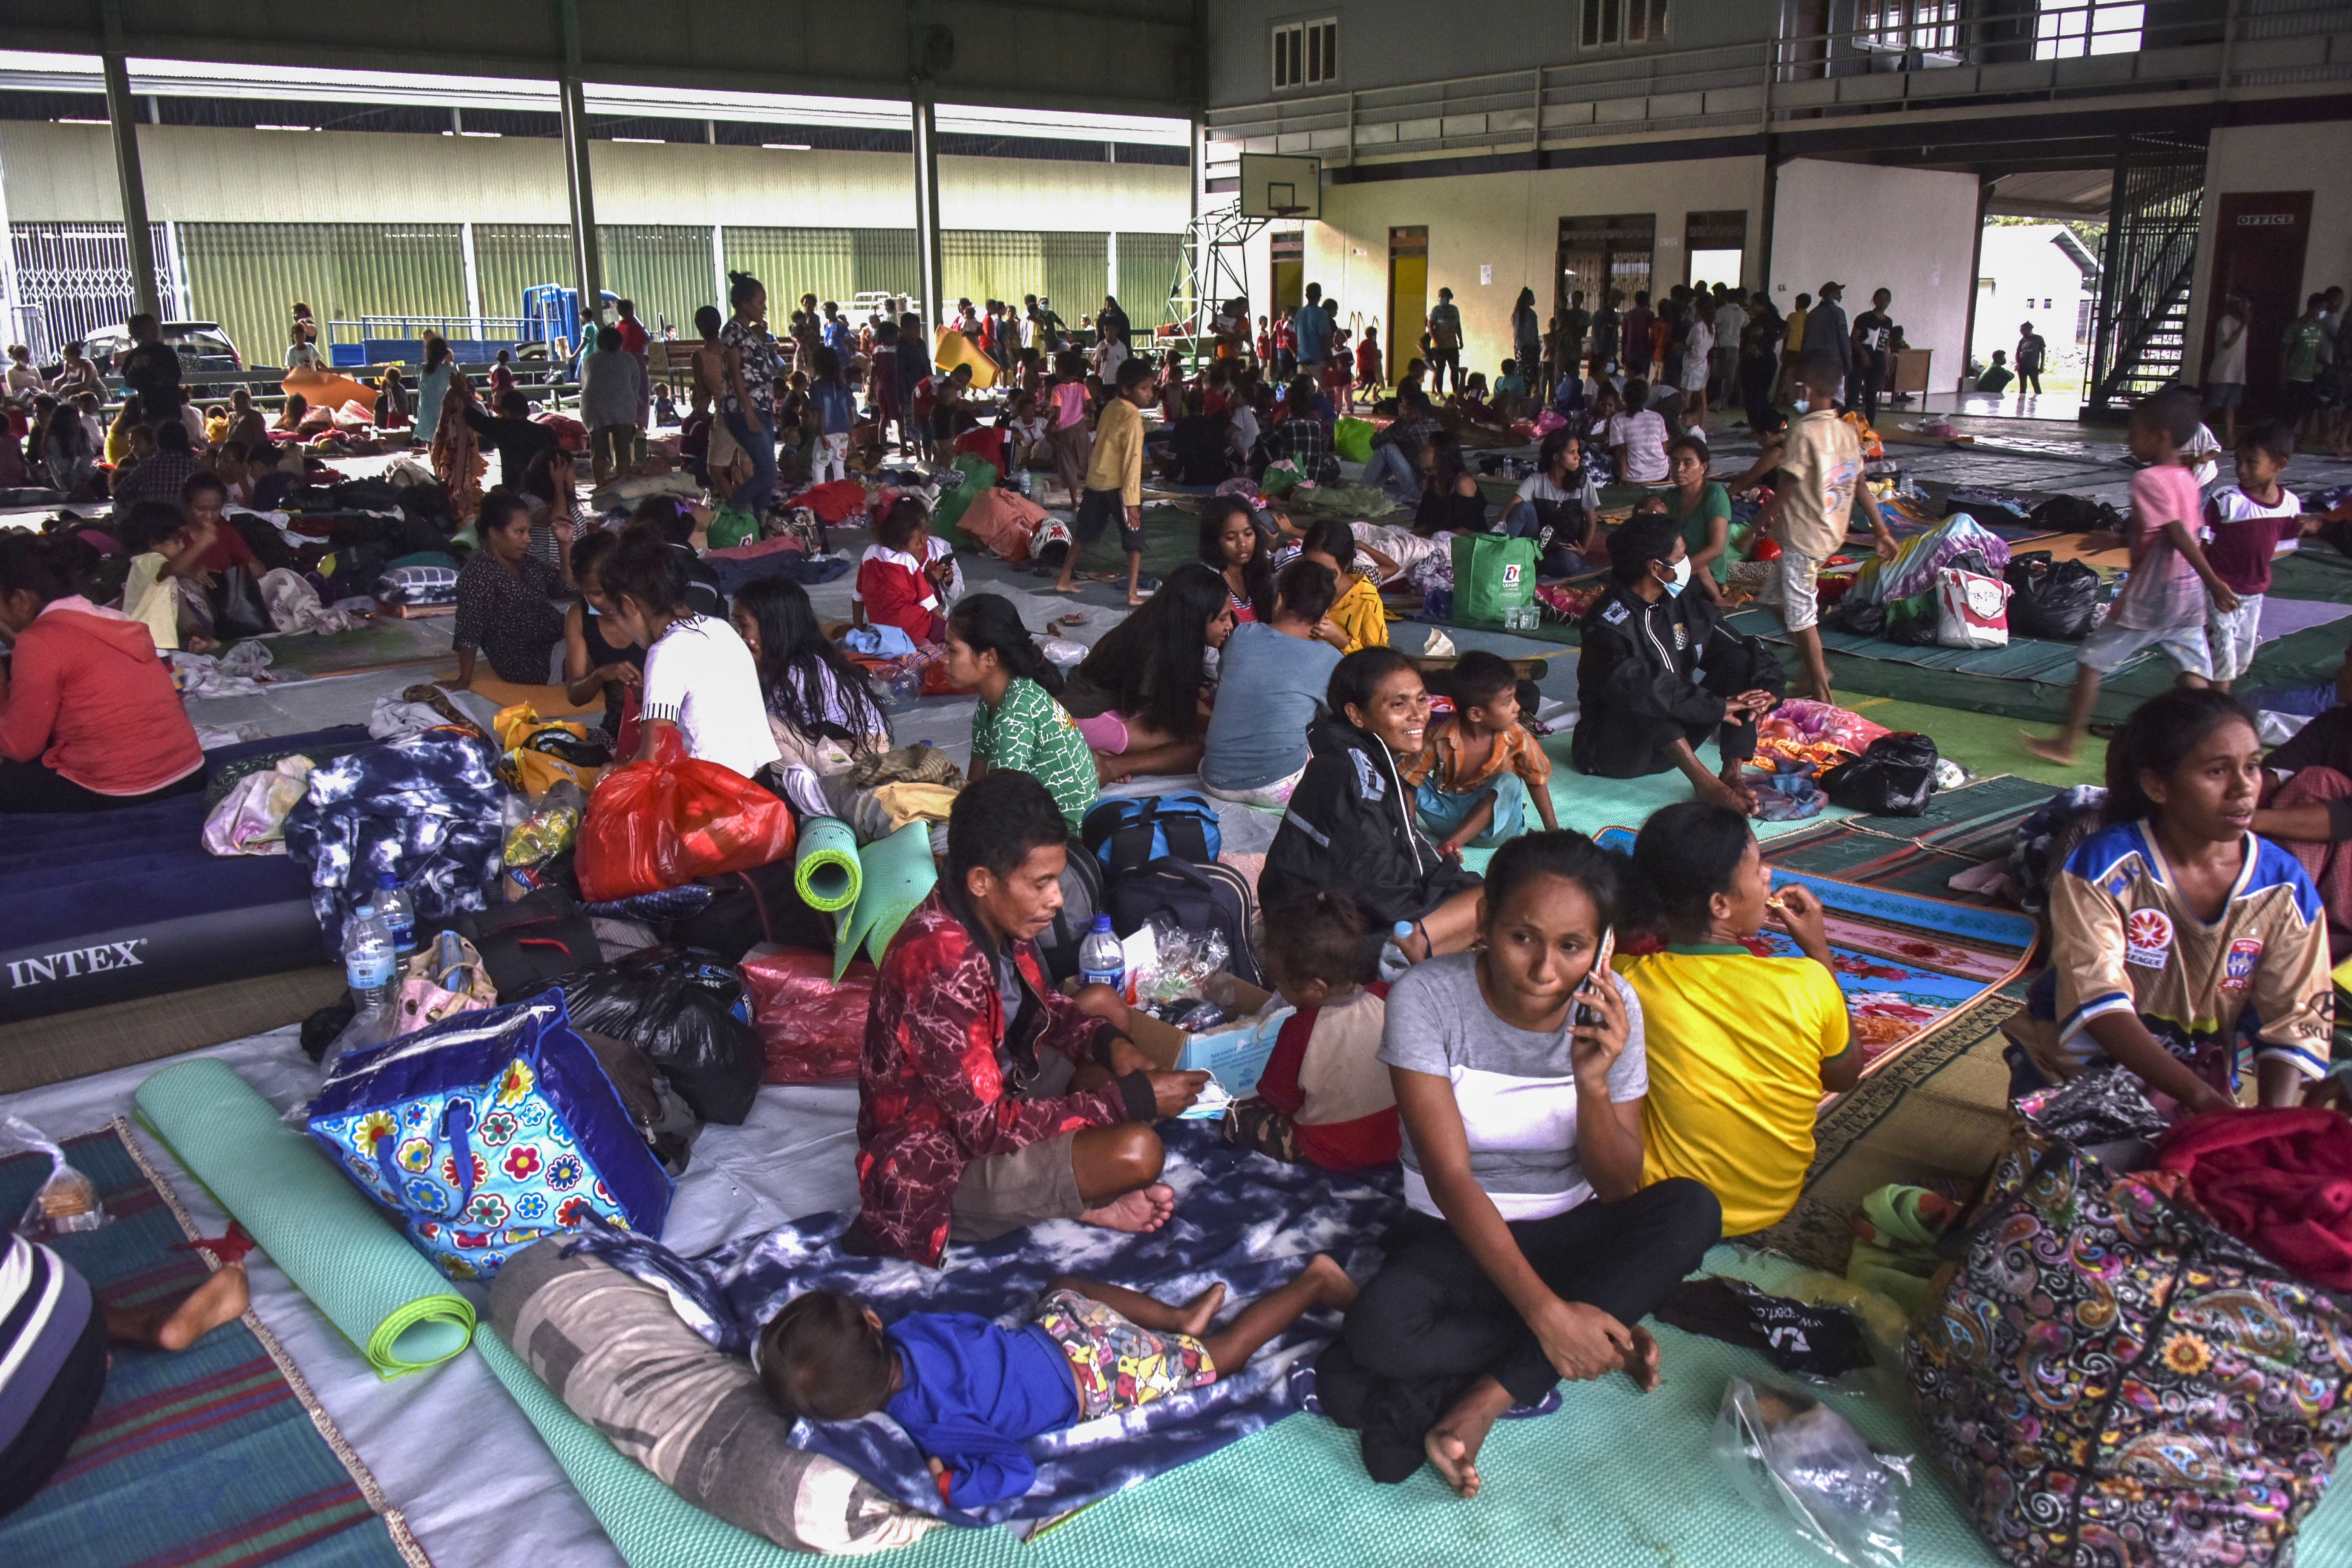 Residents take refuge at an evacuation centre after fleeing their damaged homes in Dili after torrential rains triggered floods and landslides in Indonesia and East Timor photo.